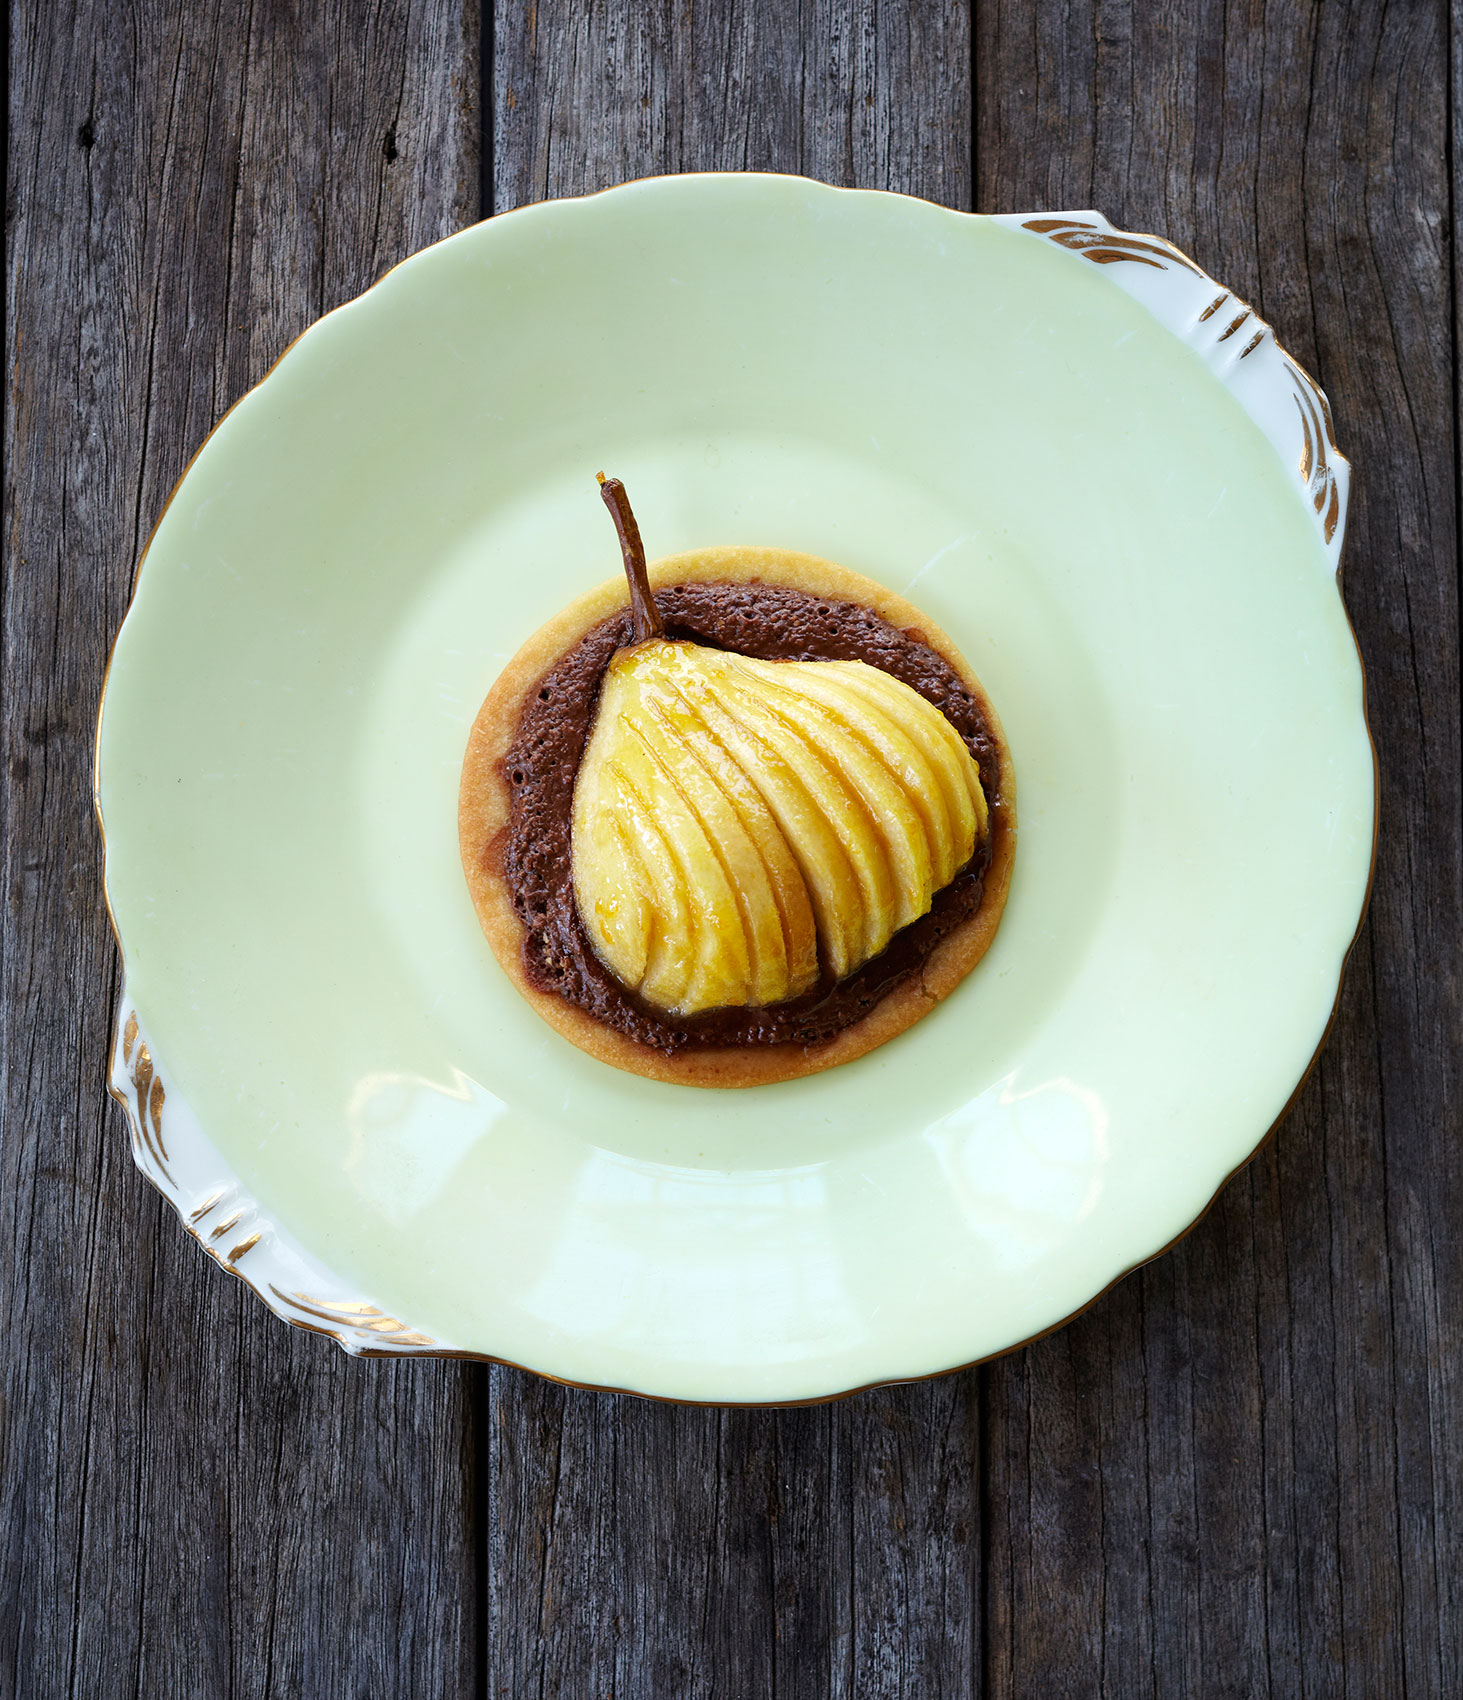 Free Range in the City • Hazelnut Tarts with Glazed Pear in China Bowl • Cookbook & Lifestyle Food Photography